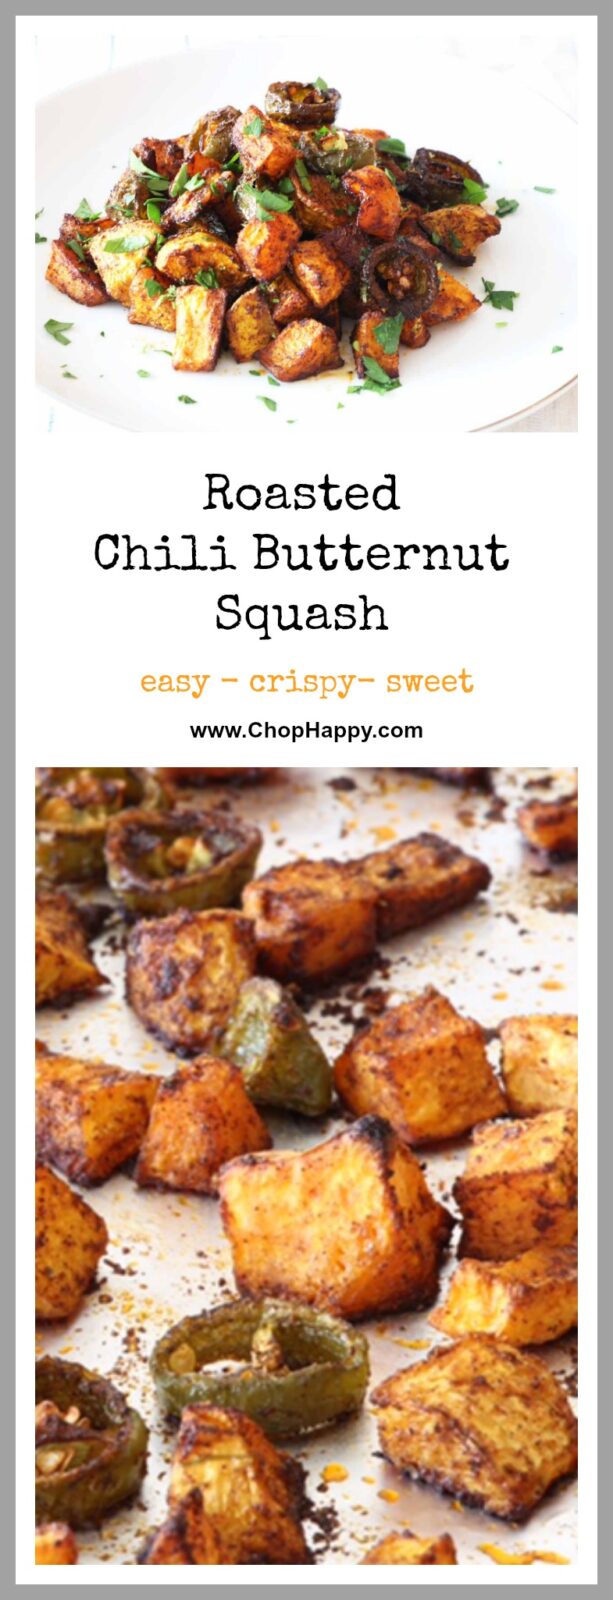 Roasted Chili Butternut Squash Recipe- crunchy, sweet and warm comfort food hug. This is more then just a recipe. Each step can be applied as technique to potatoes, sweet potatoes and other veggies. www.ChopHappy.com